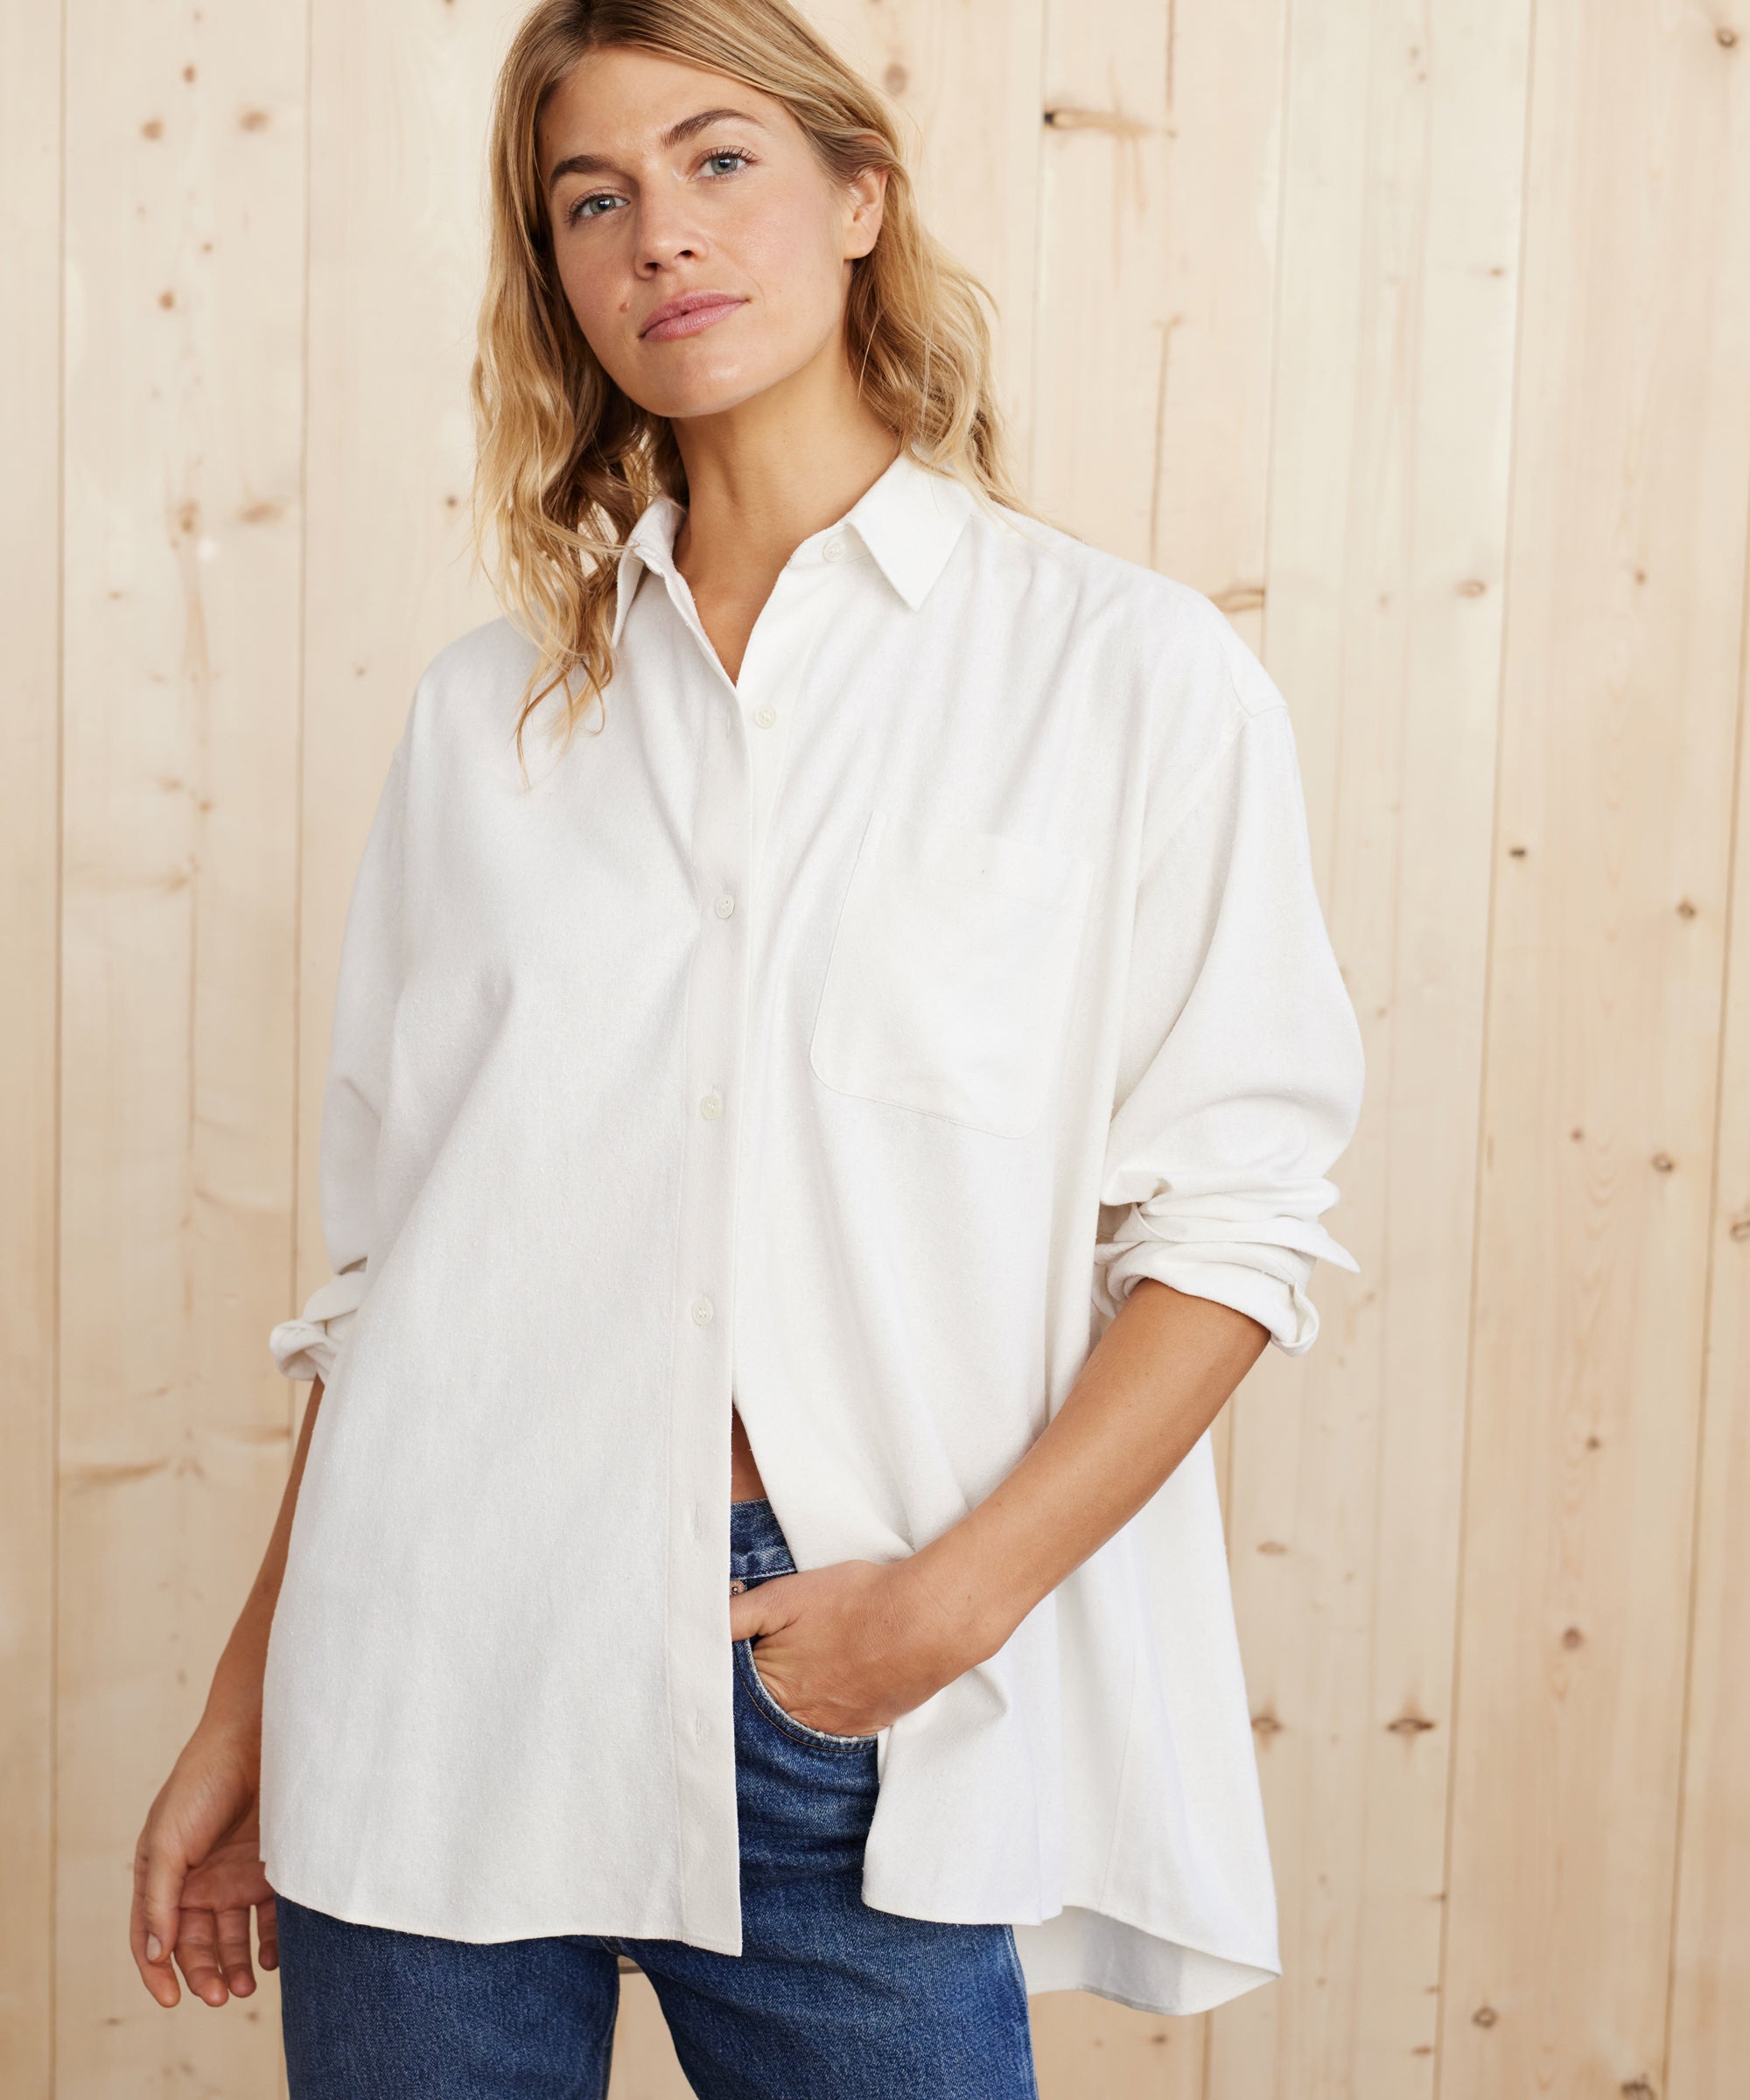 RELAXED BUTTON THROUGH BLOUSE  Clothes, Clothes for sale, Blouse